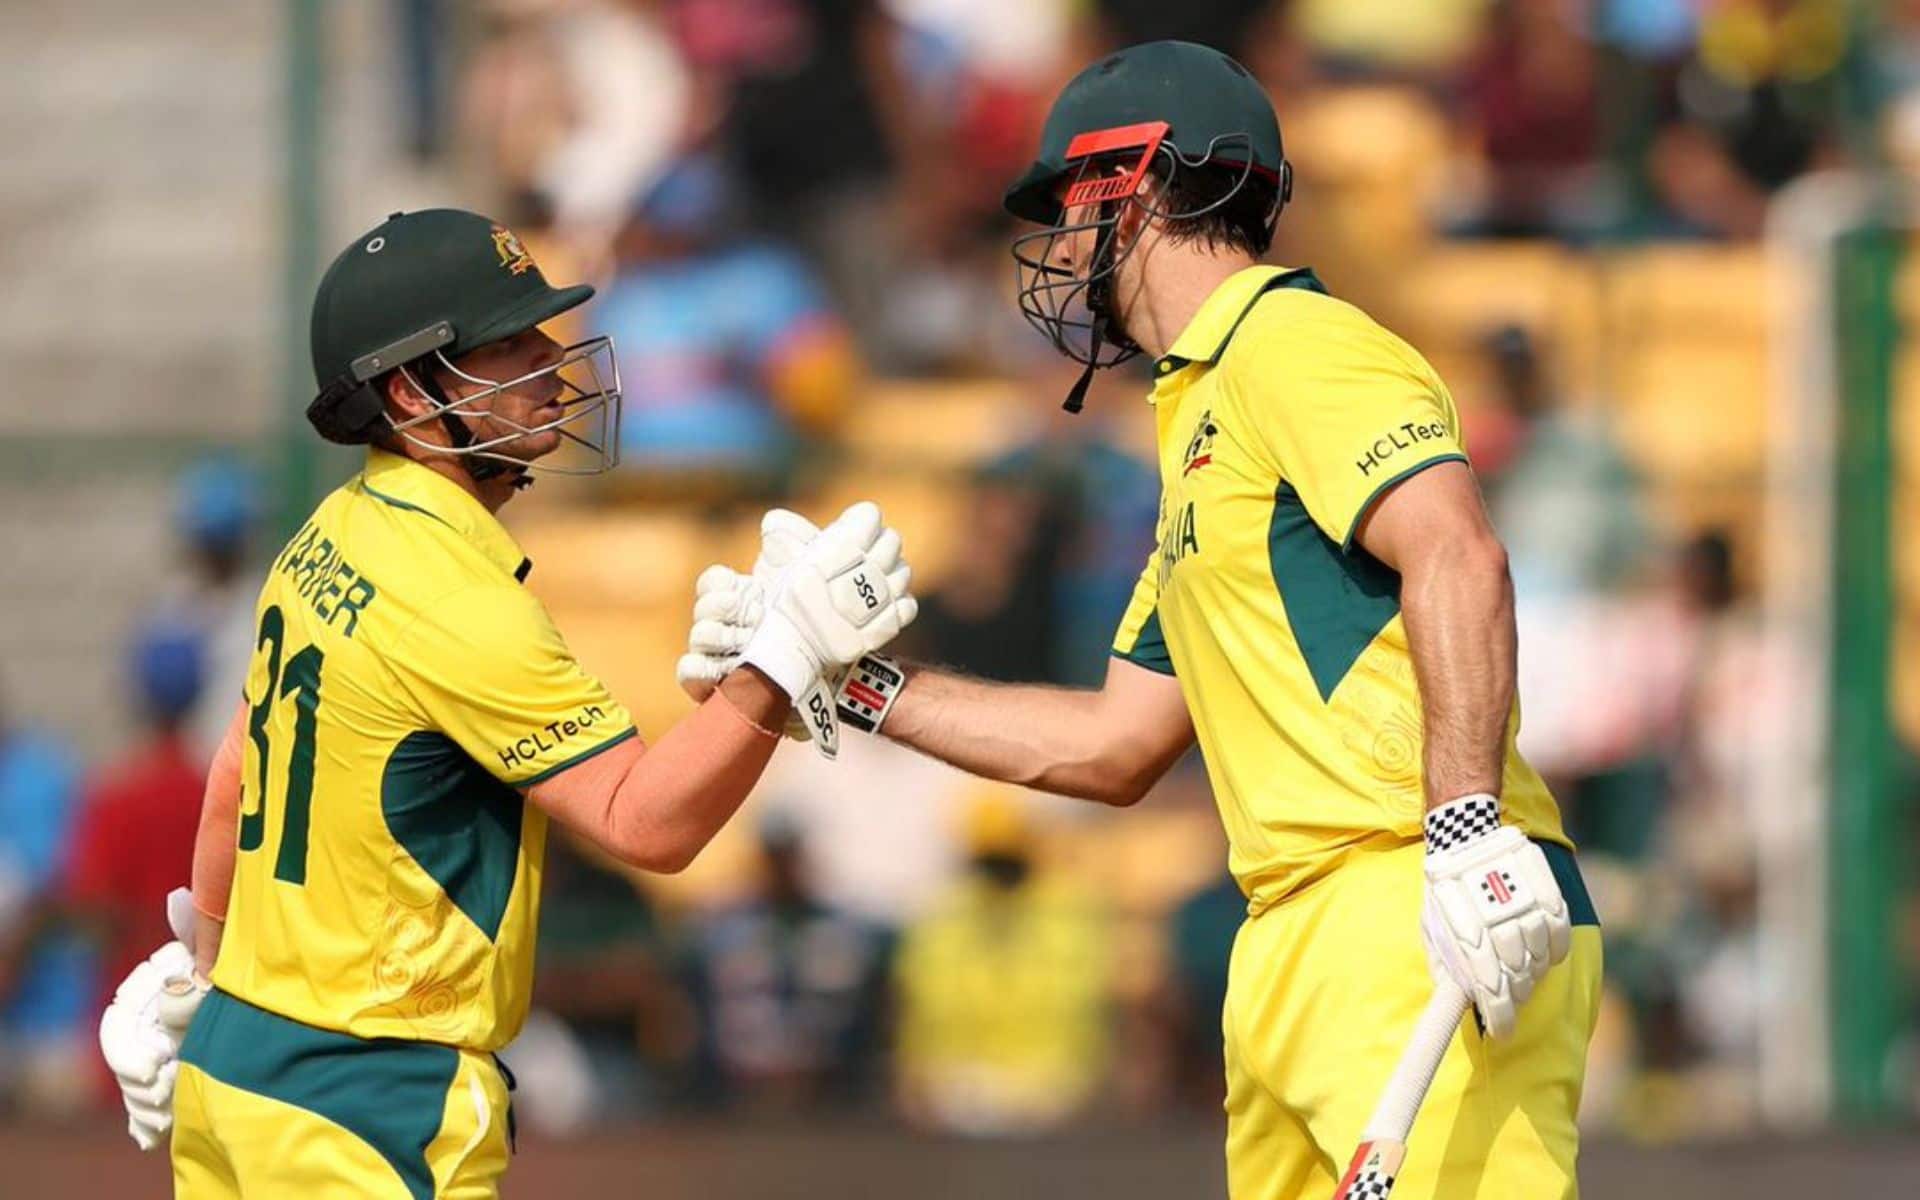 Australia To Play Support Staff In T20 World Cup Warm-Up Match? Only 8 Players Available